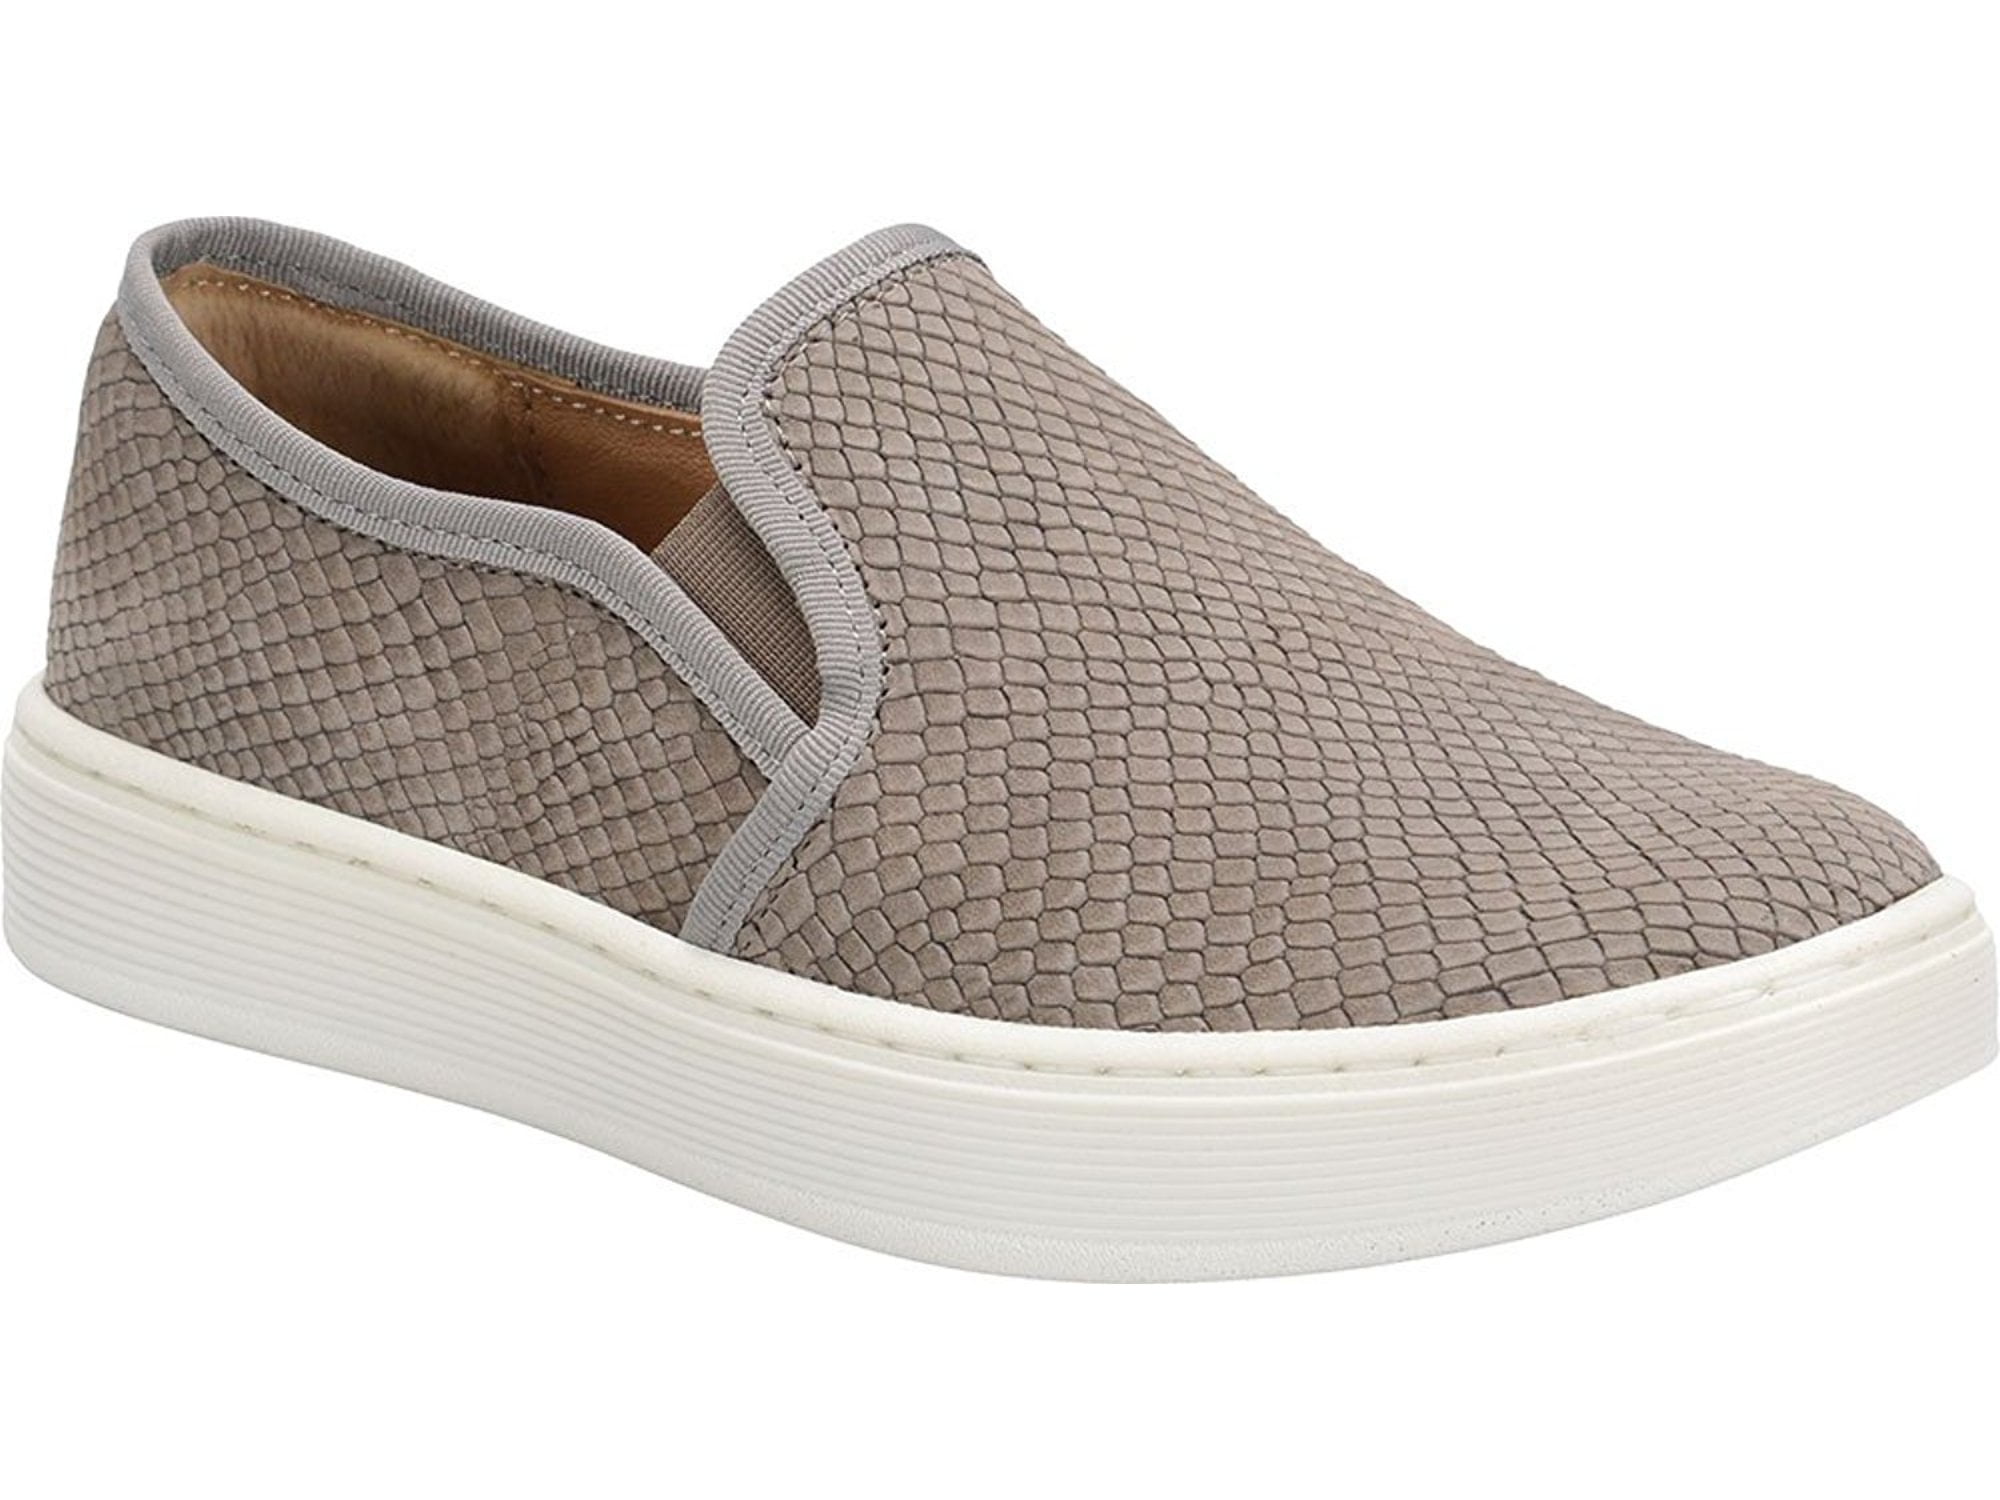 Sofft - Sofft Womens Somers Round Toe Loafers, Snare Grey, Size 6.5 ...